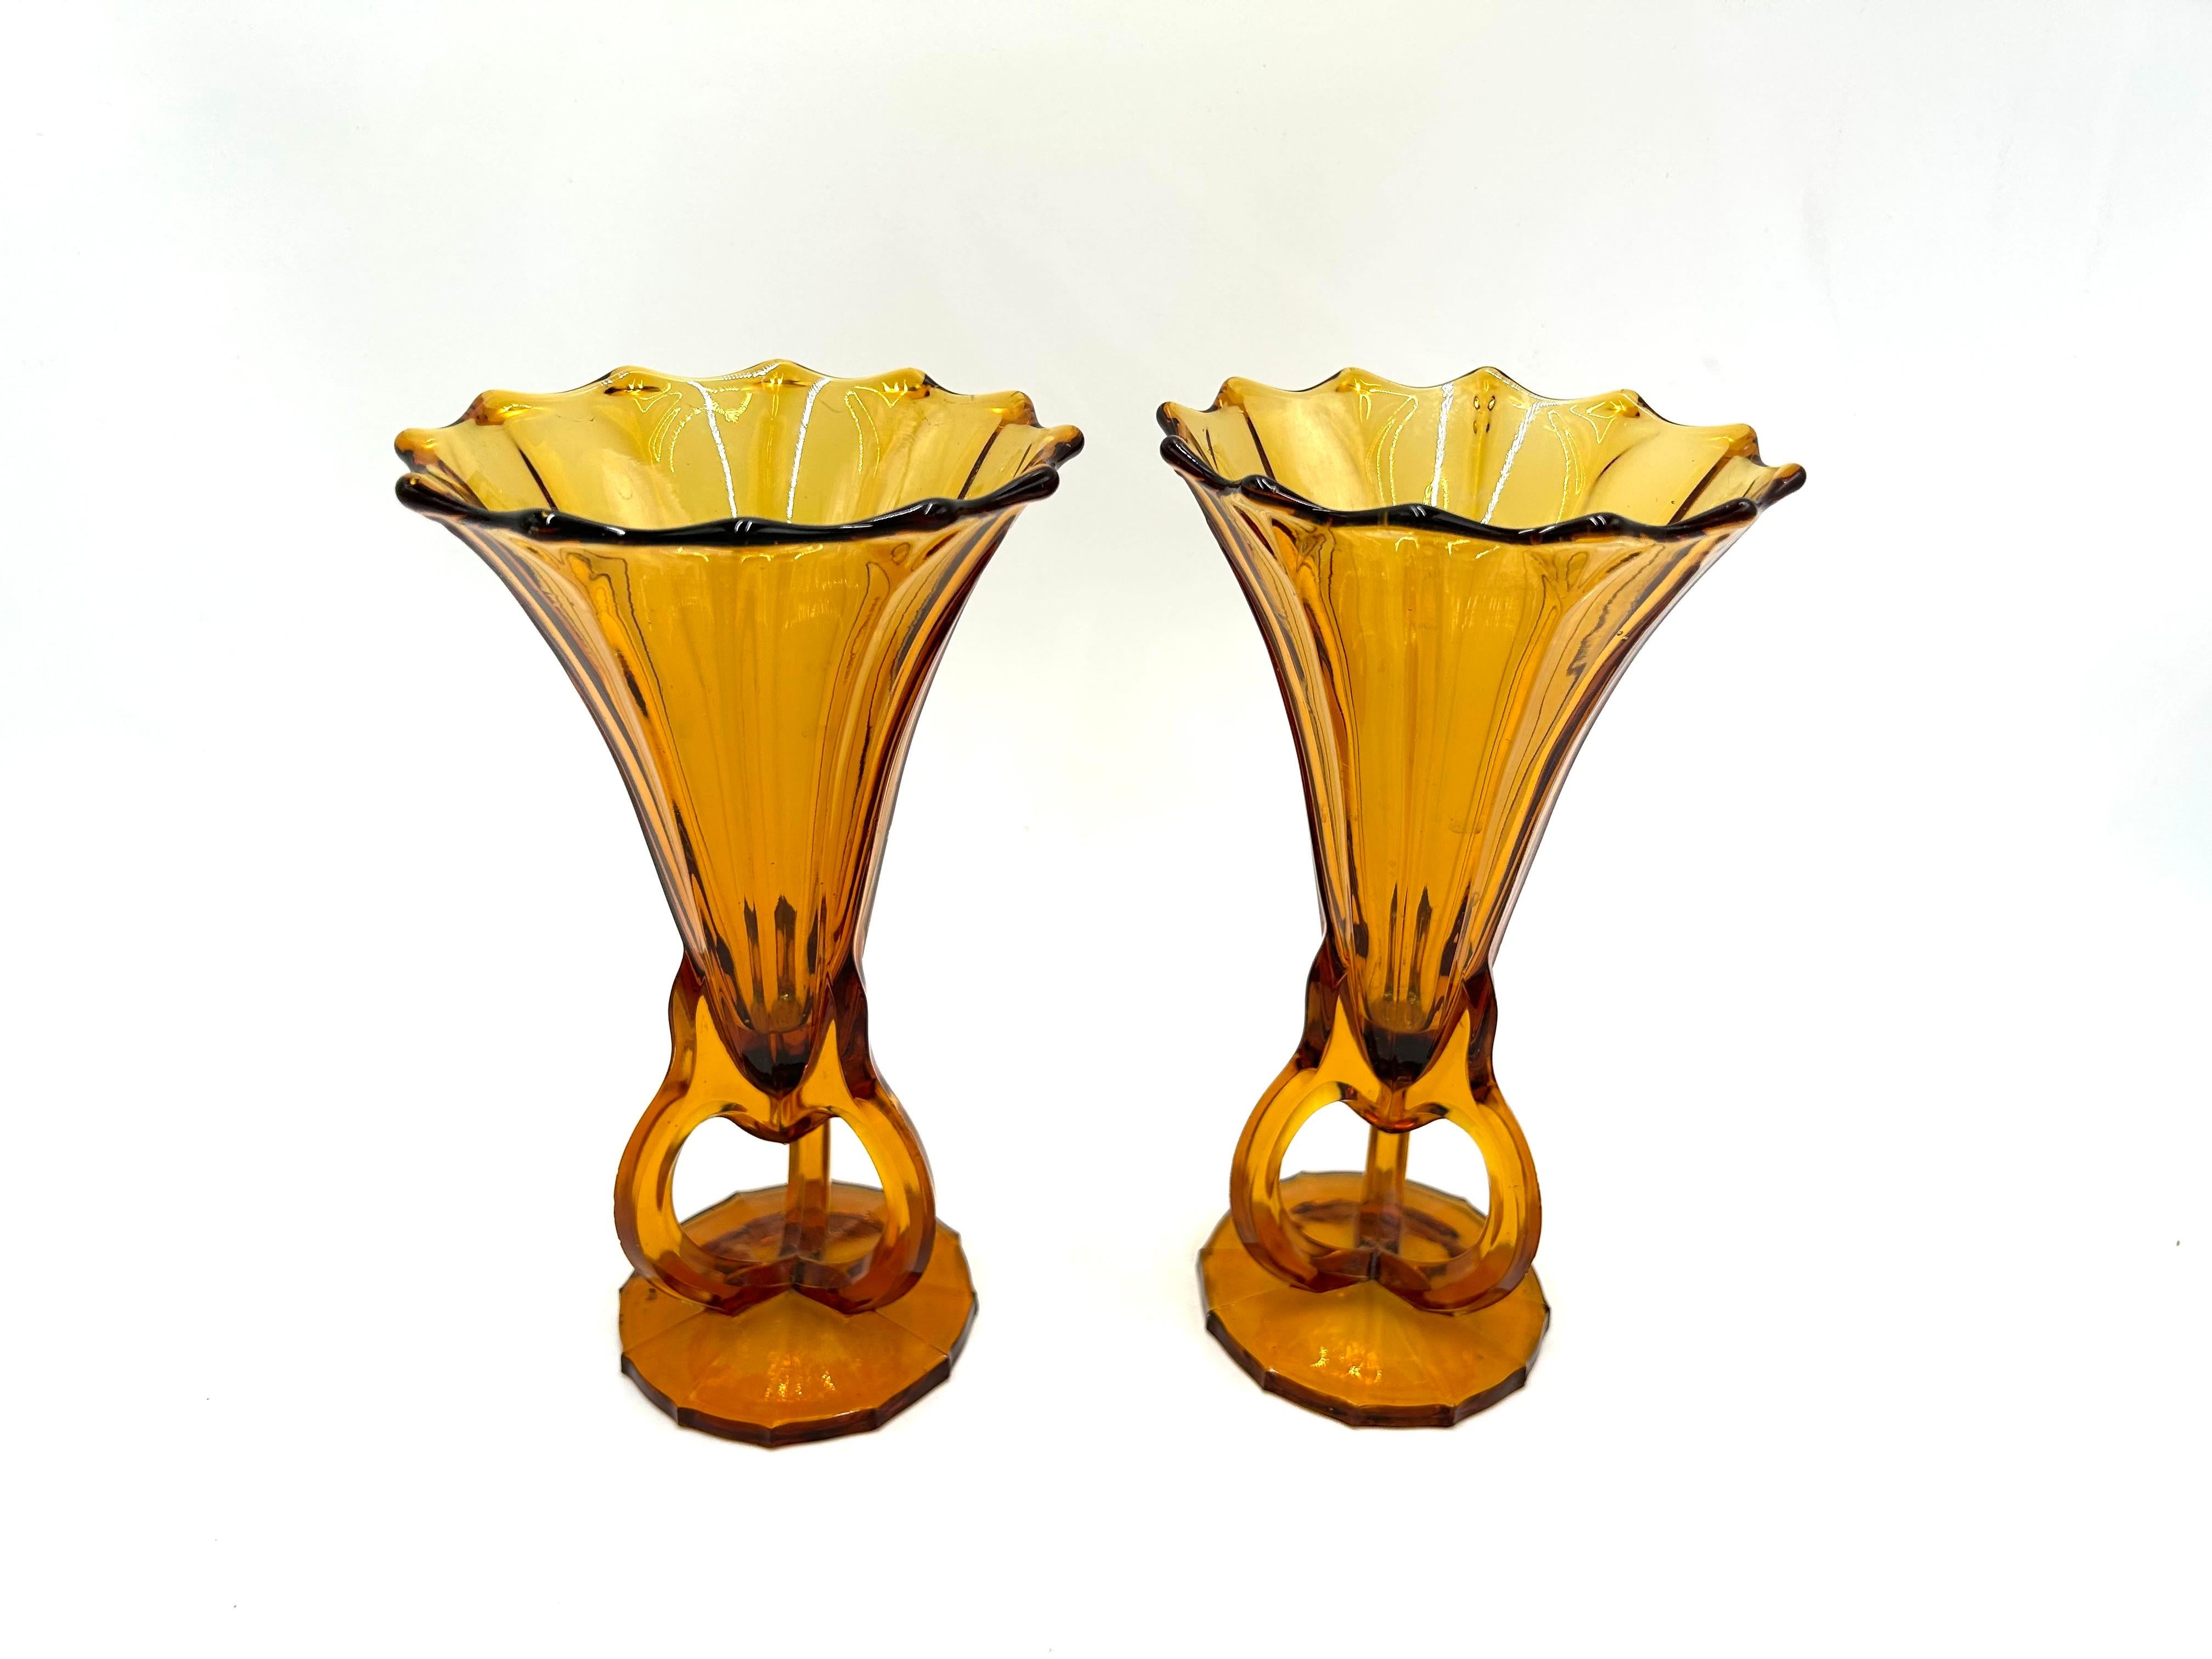 A pair of Art Deco amber glass vases

Made in the Czech Republic in the 1930s

Very good condition, no damage

Height: 21.5 cm

Outlet diameter: 12cm.